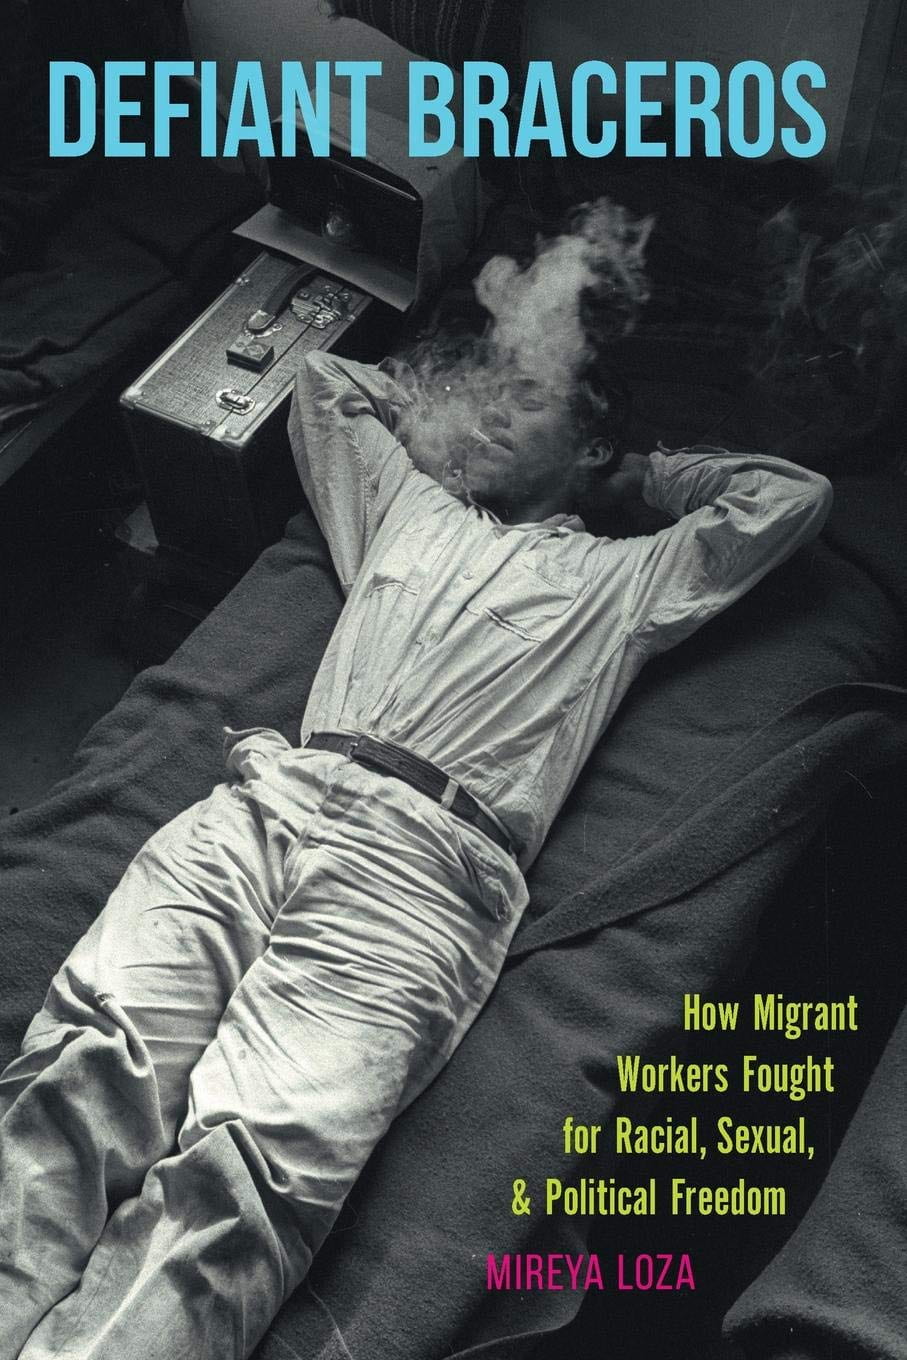 Defiant Braceros: How Migrant Workers Fought for Racial, Sexual and Political Freedom (UNC Press)